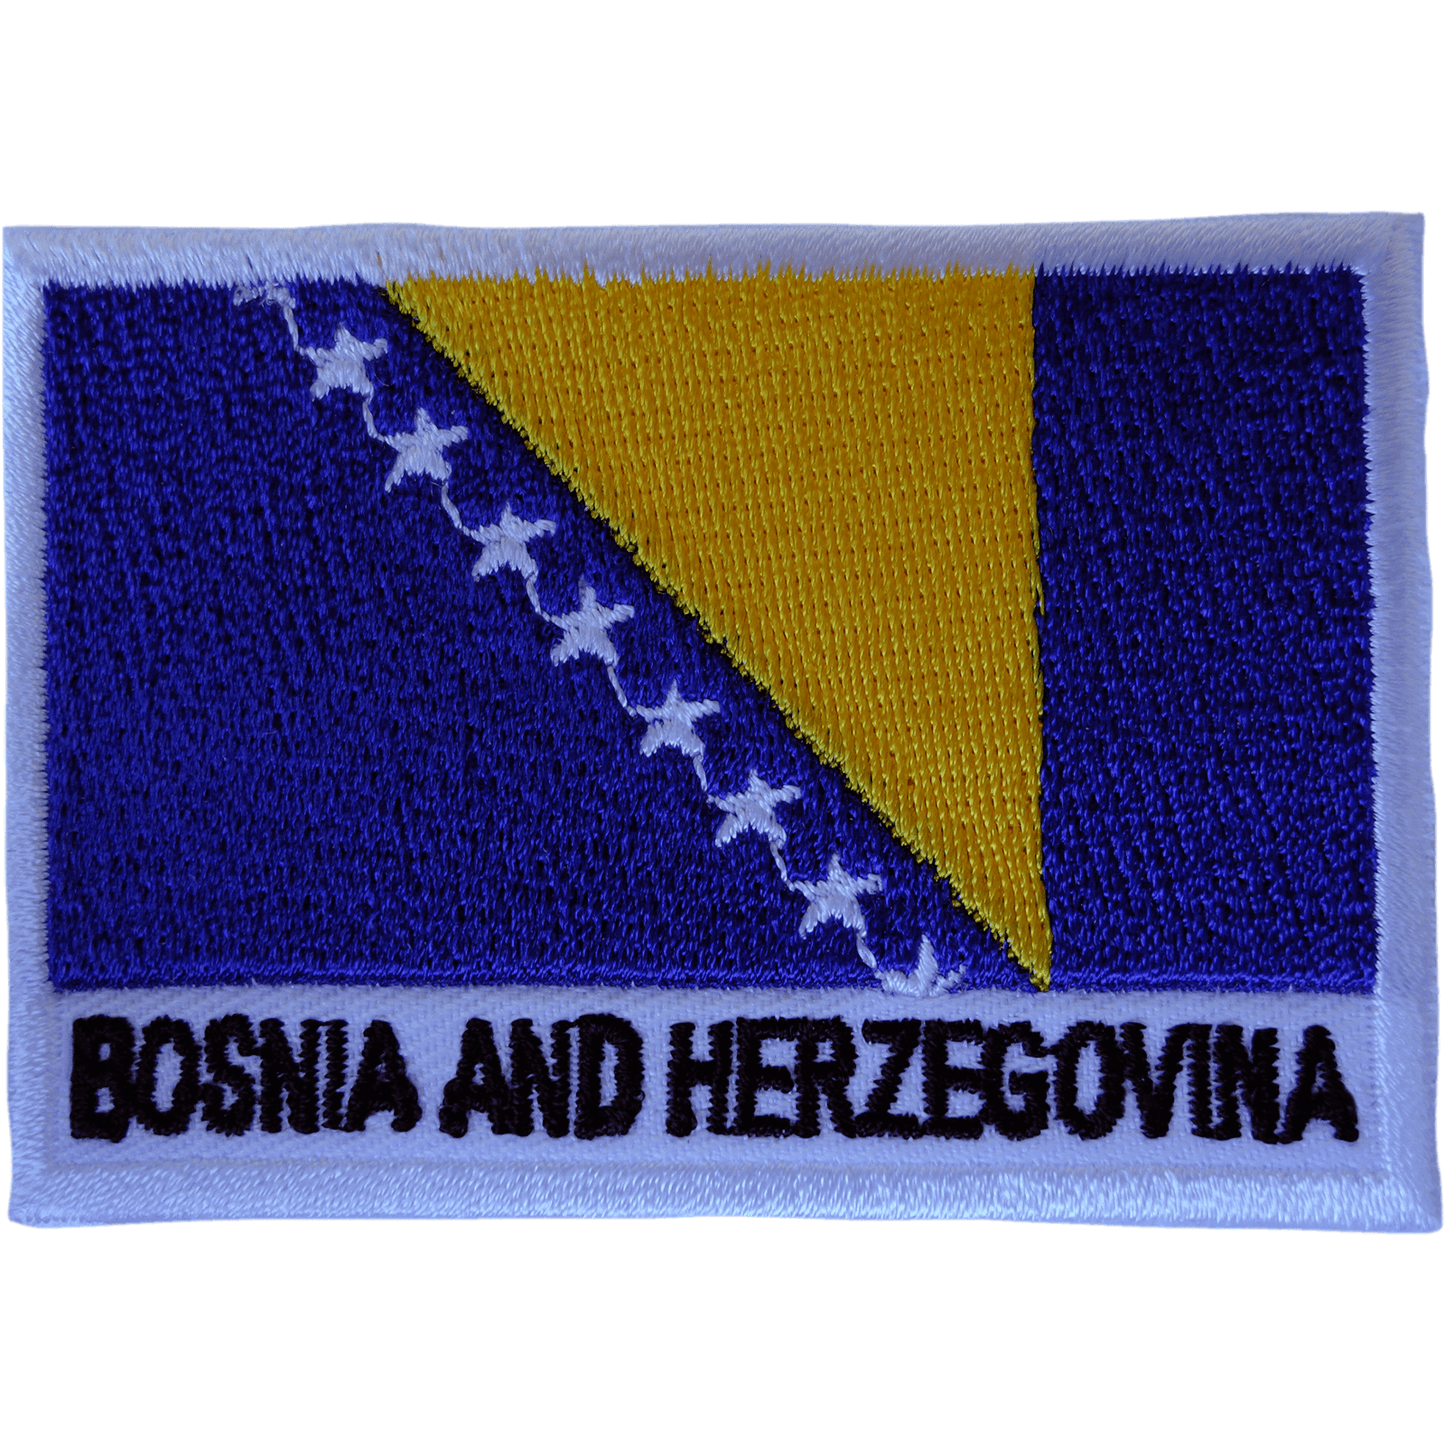 Bosnia and Herzegovina Flag Patch Iron Sew On Clothes Bosnian Embroidered Badge